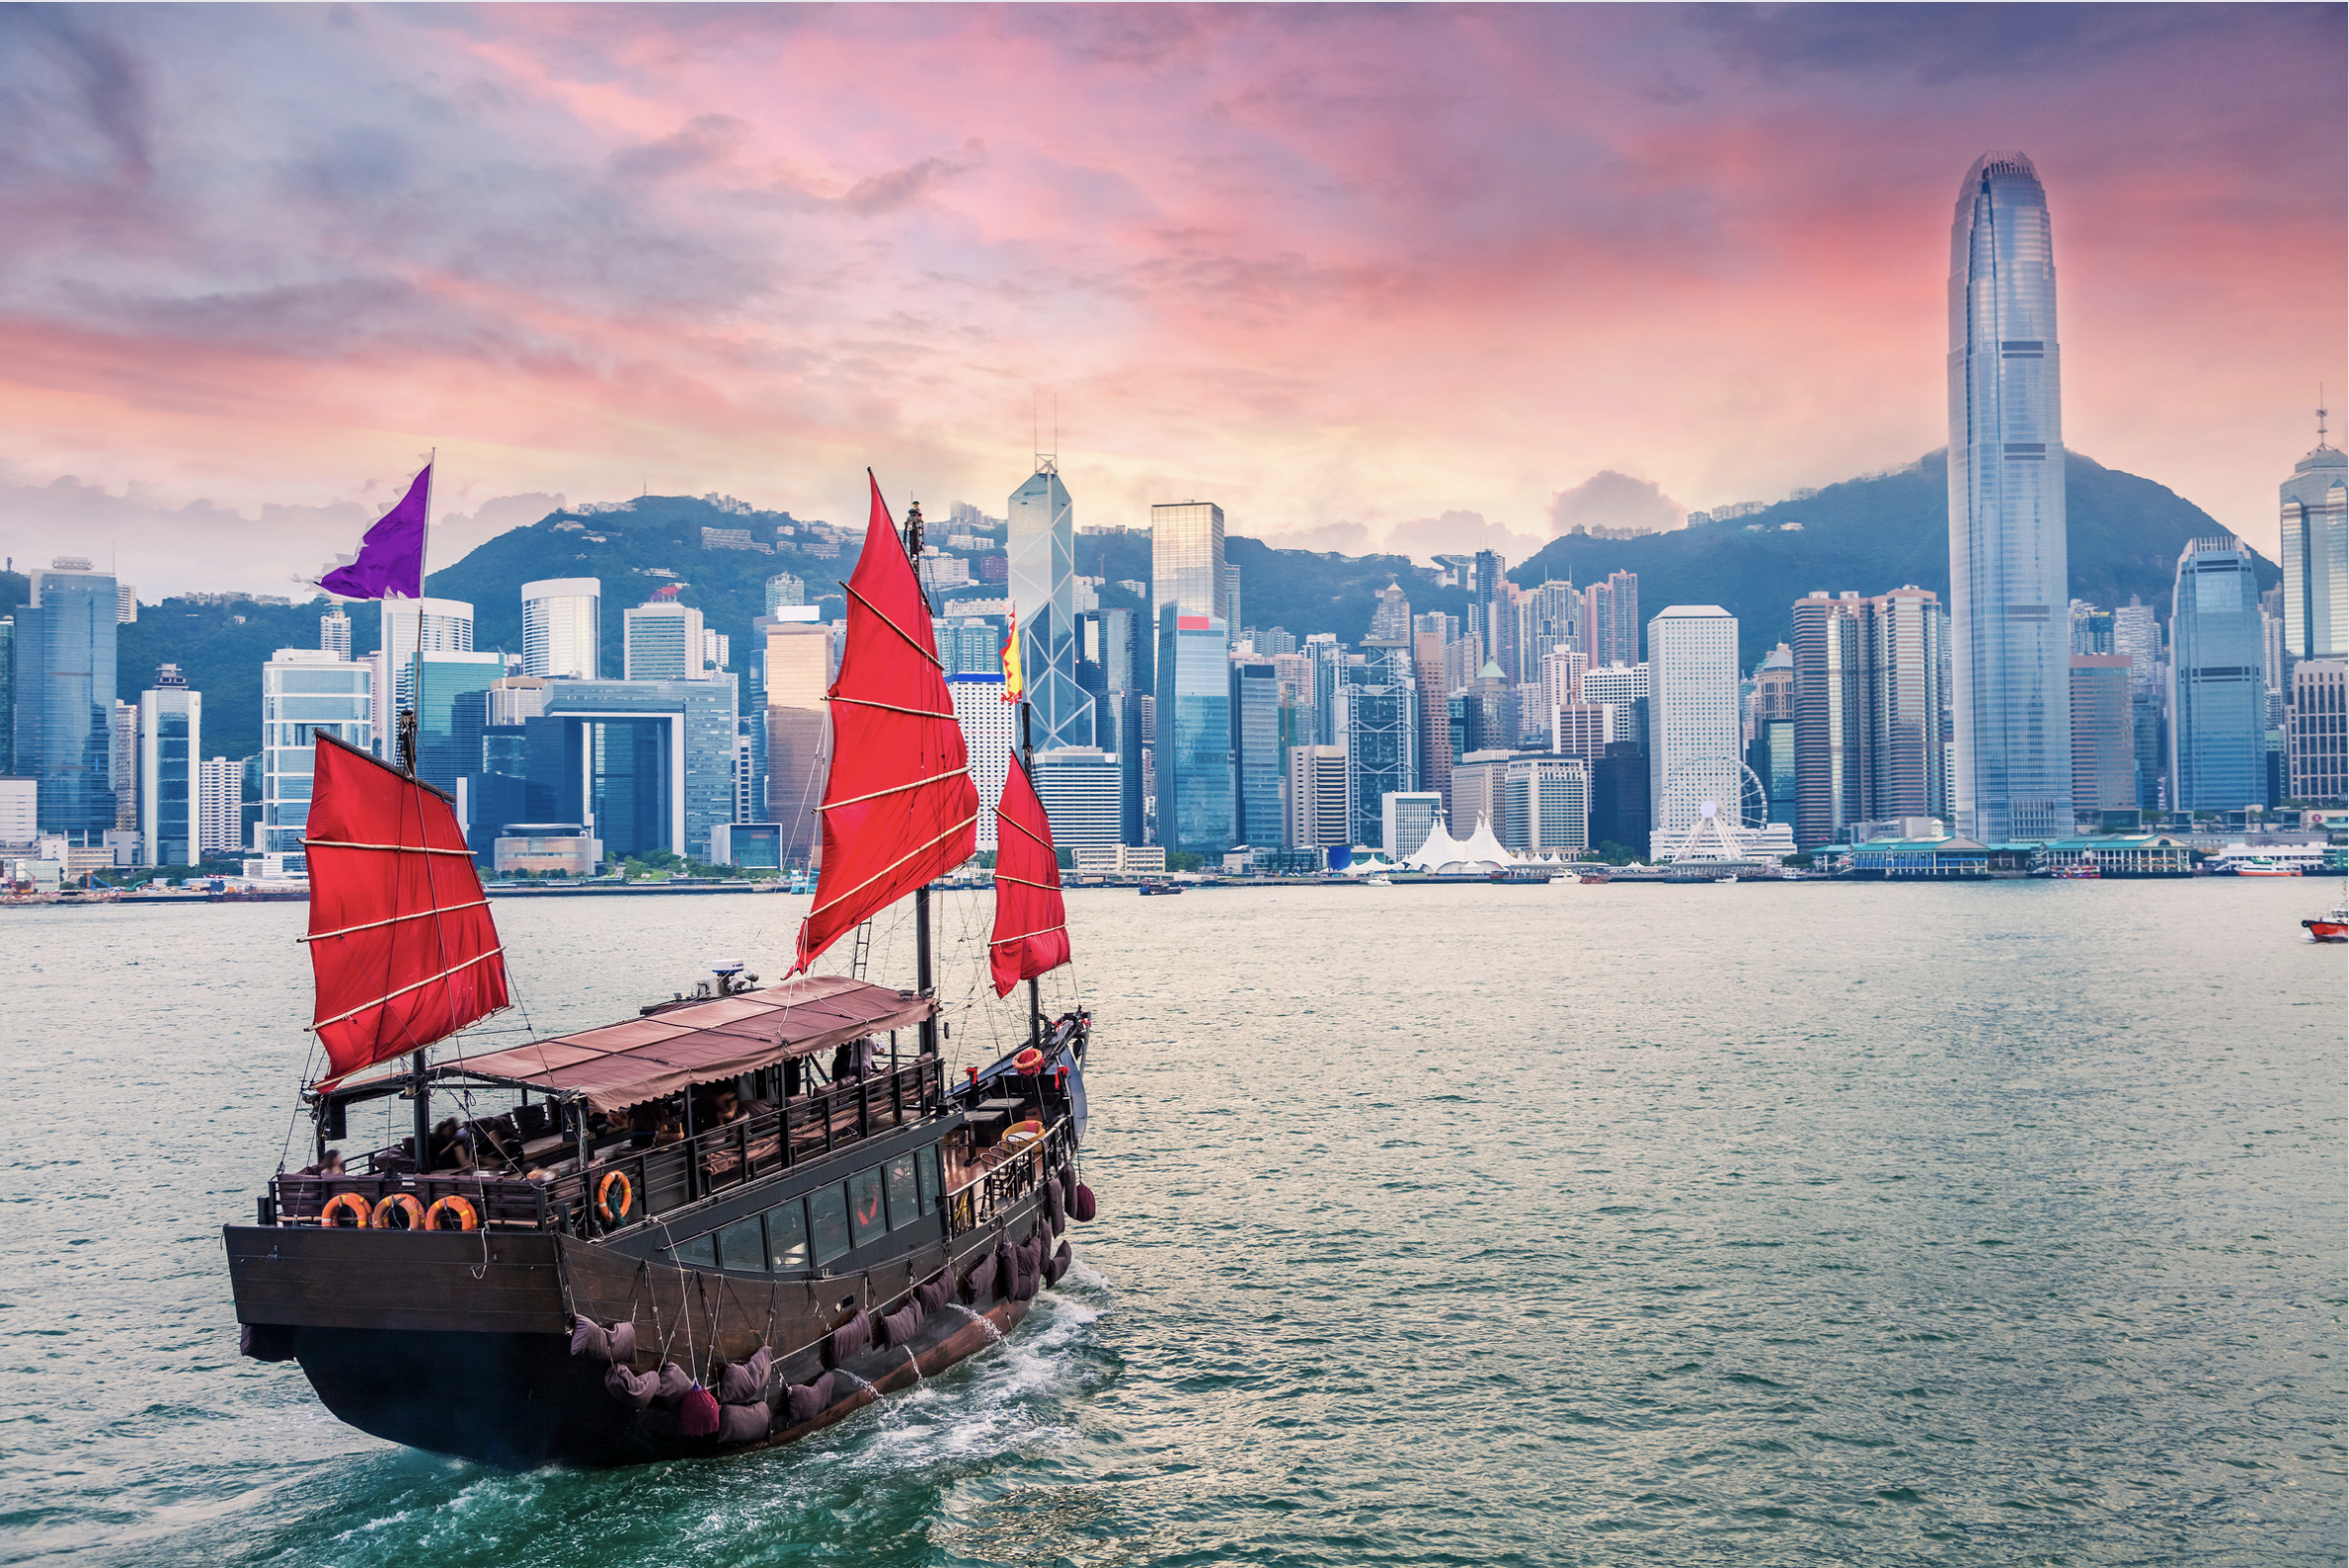 Traditional Junk boat sailing in to Victoria Harbour in Hong Kong at sunset.